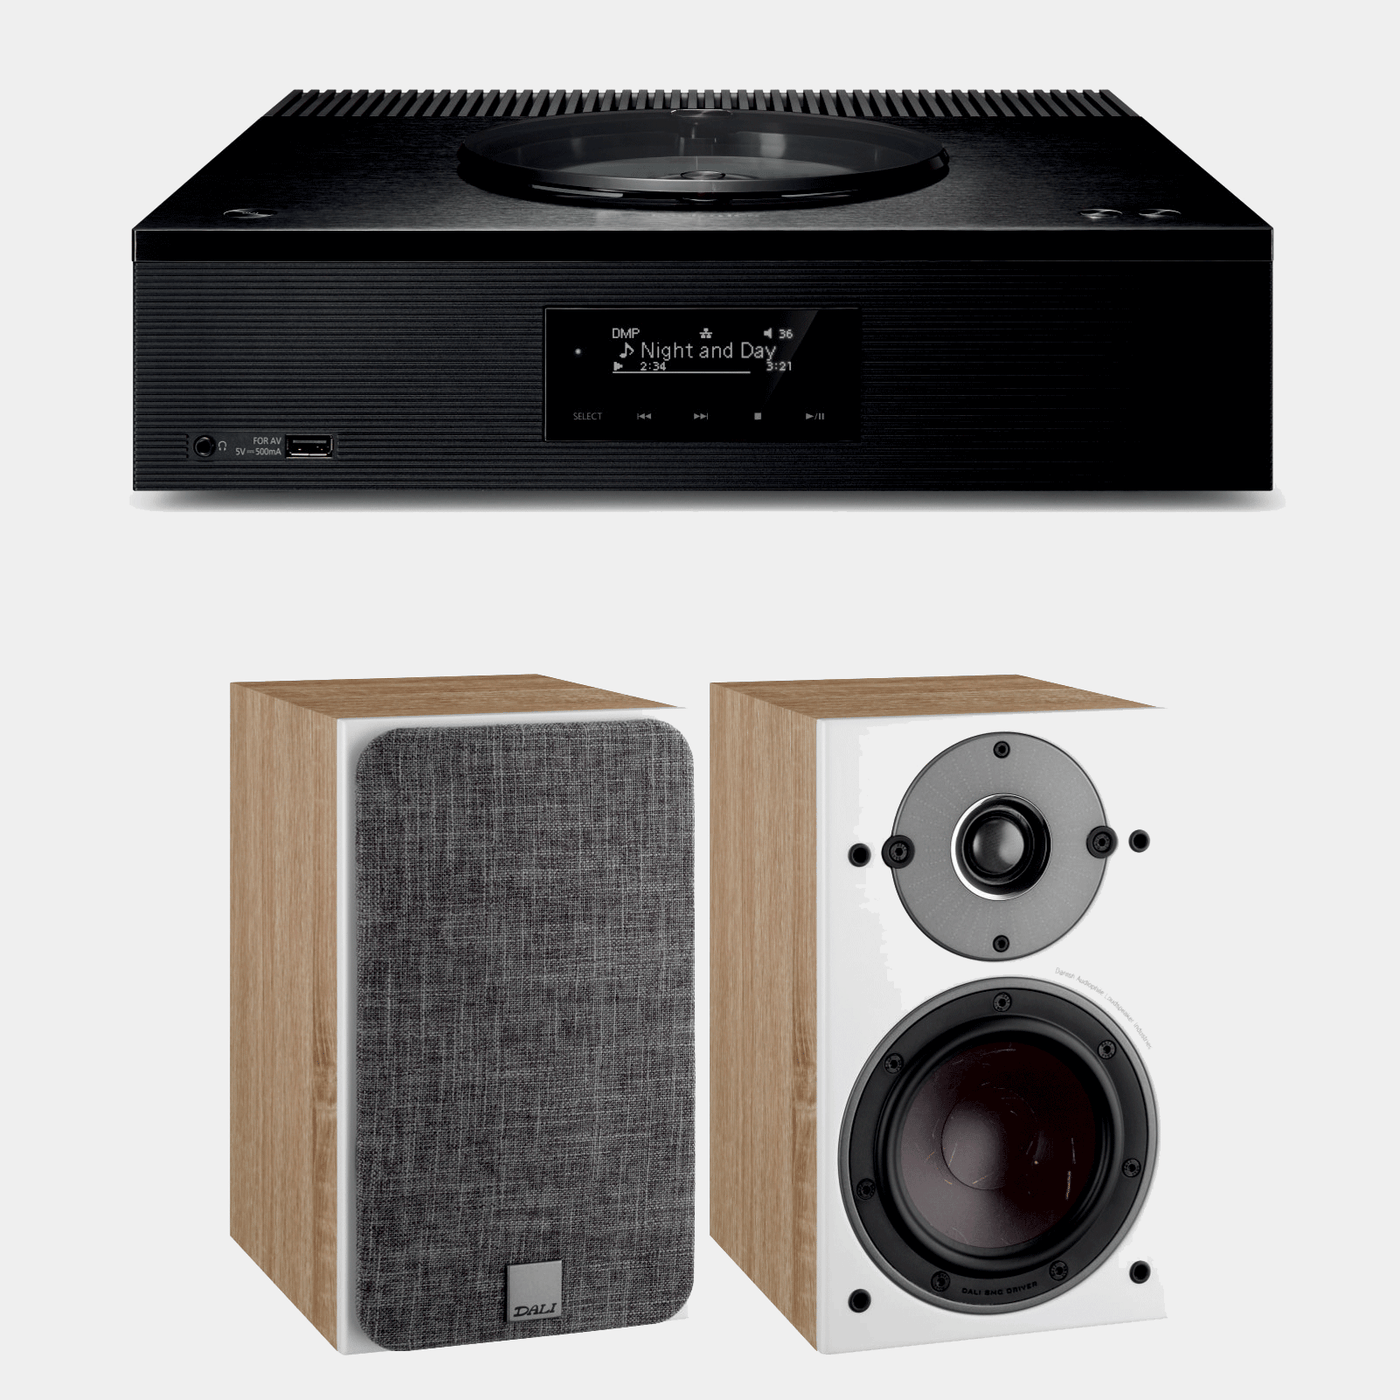 Technics SA-C600 review: a stunning just-add-speakers system that